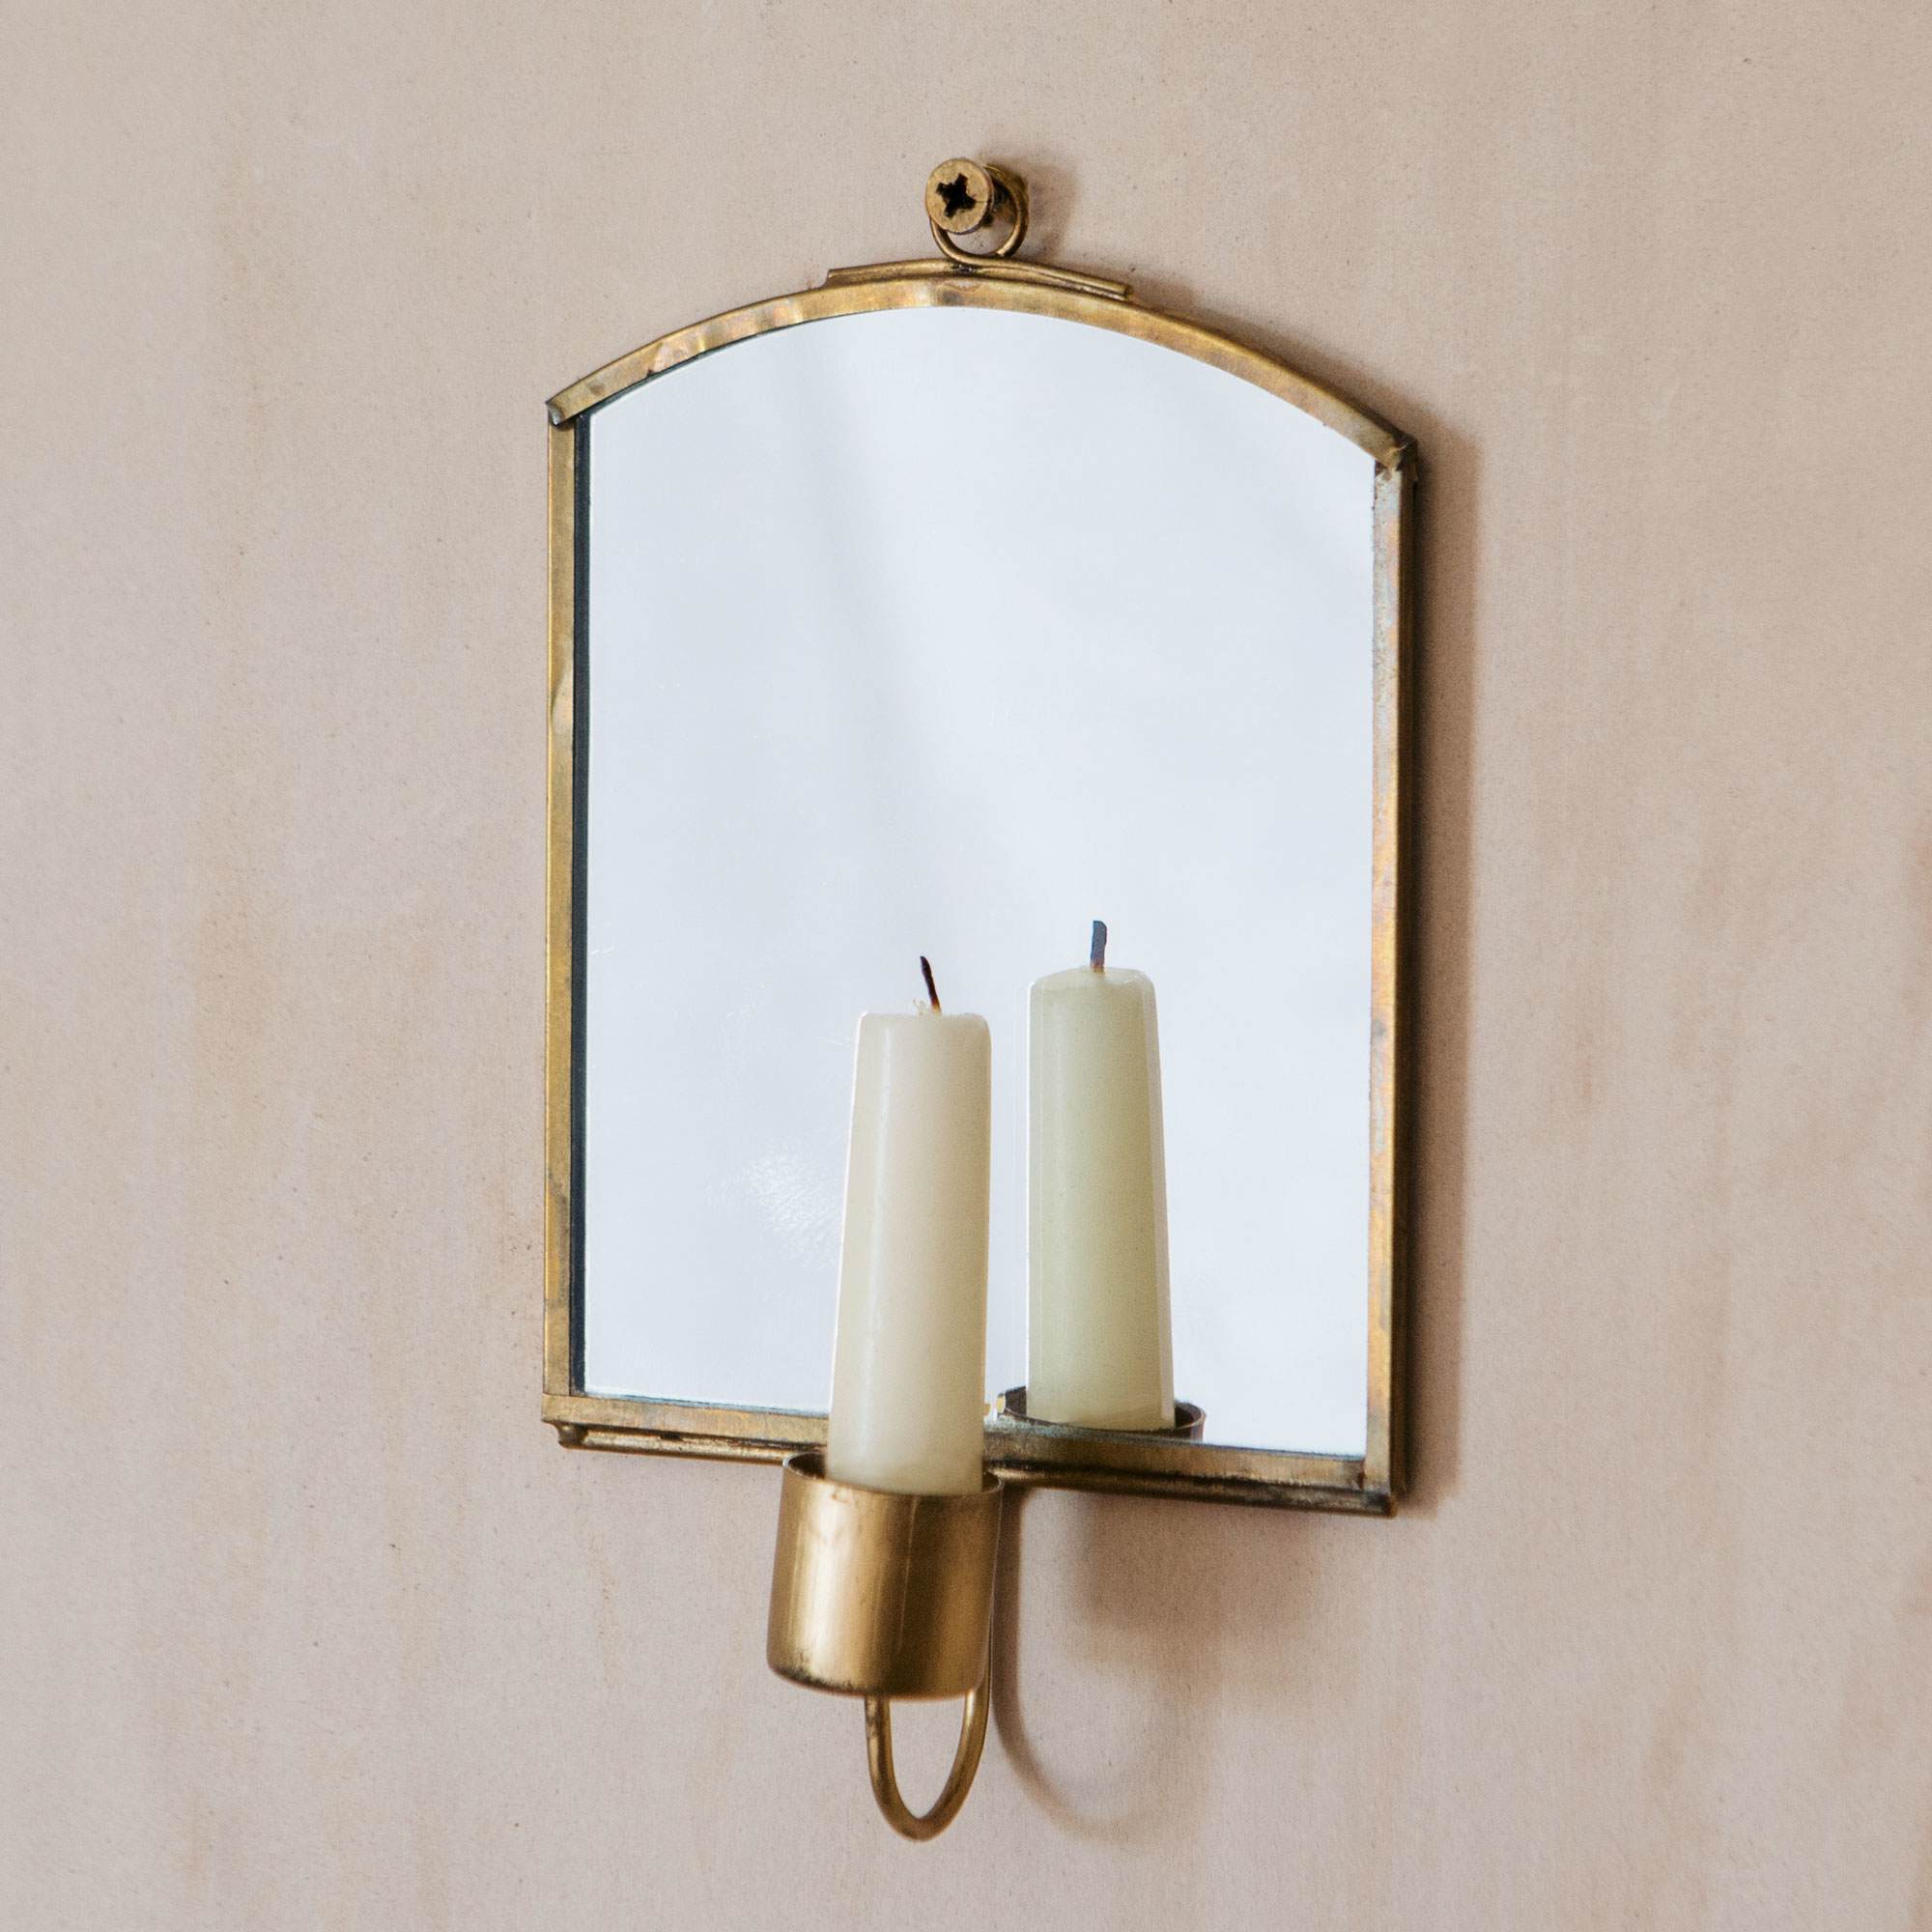 Read more about Graham and green small antique brass candle mirror